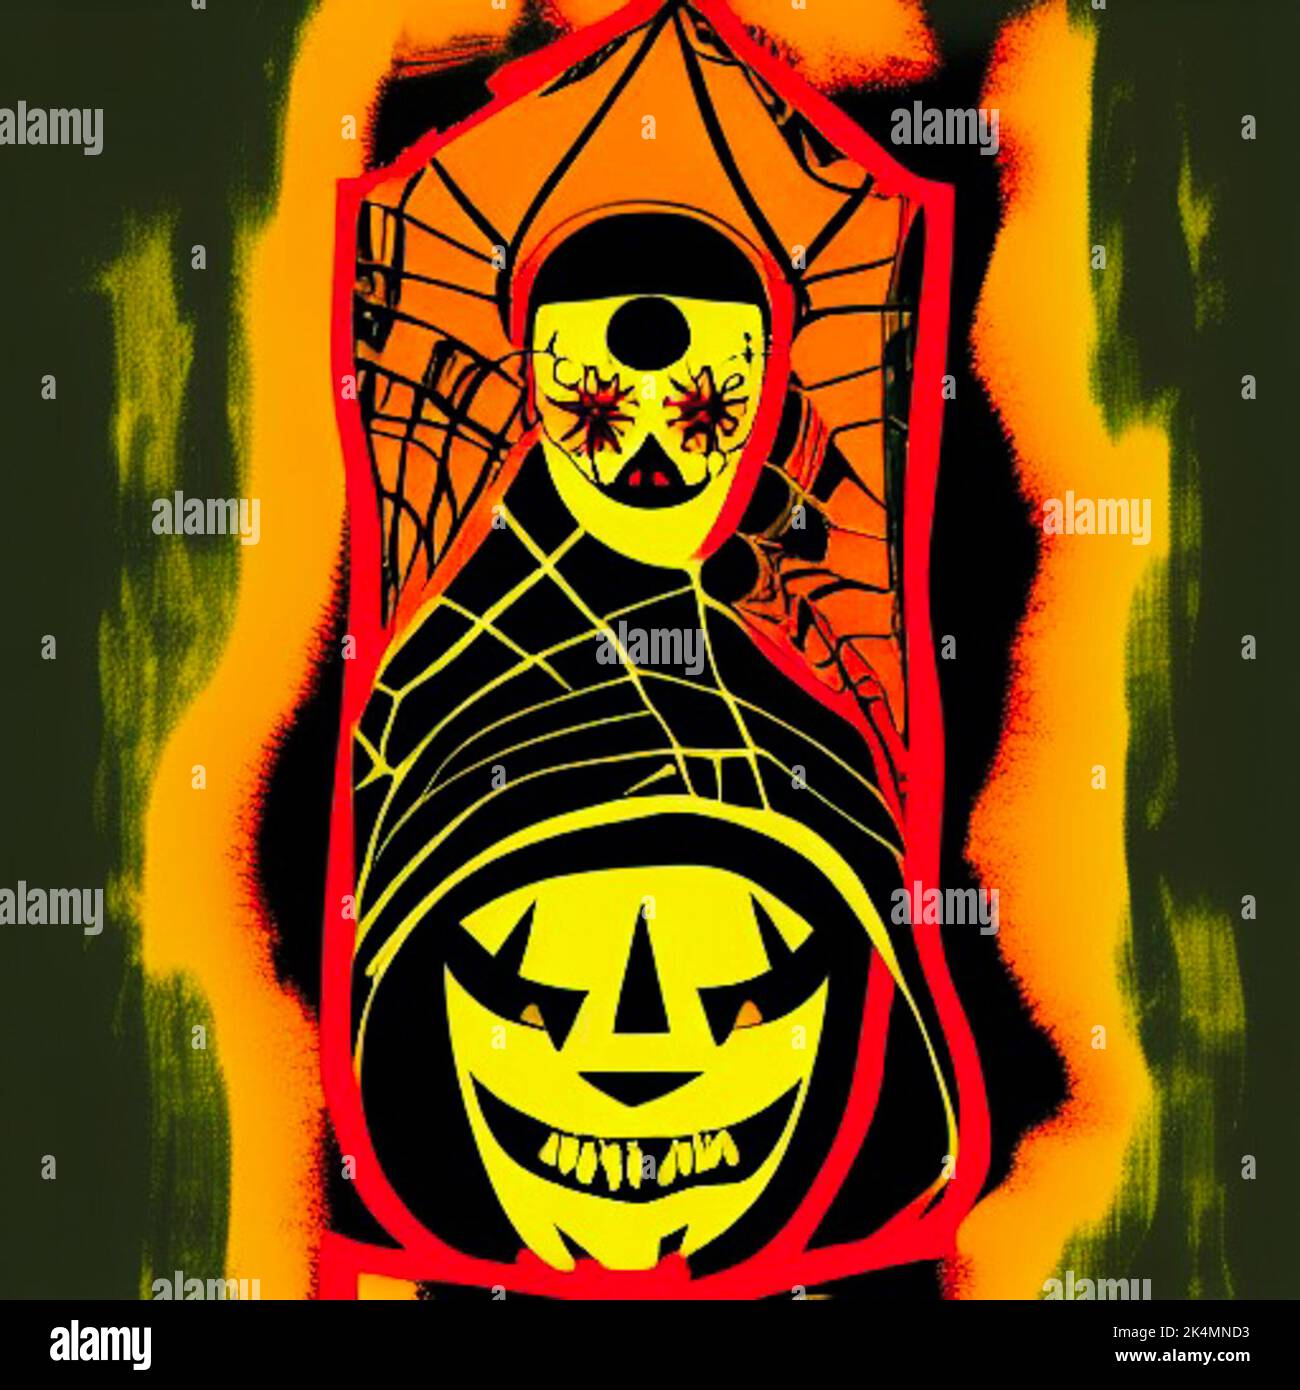 Halloween abstract skeleton model, that can be used in different projects. This art has mixed so many colors and textures. Stock Photo